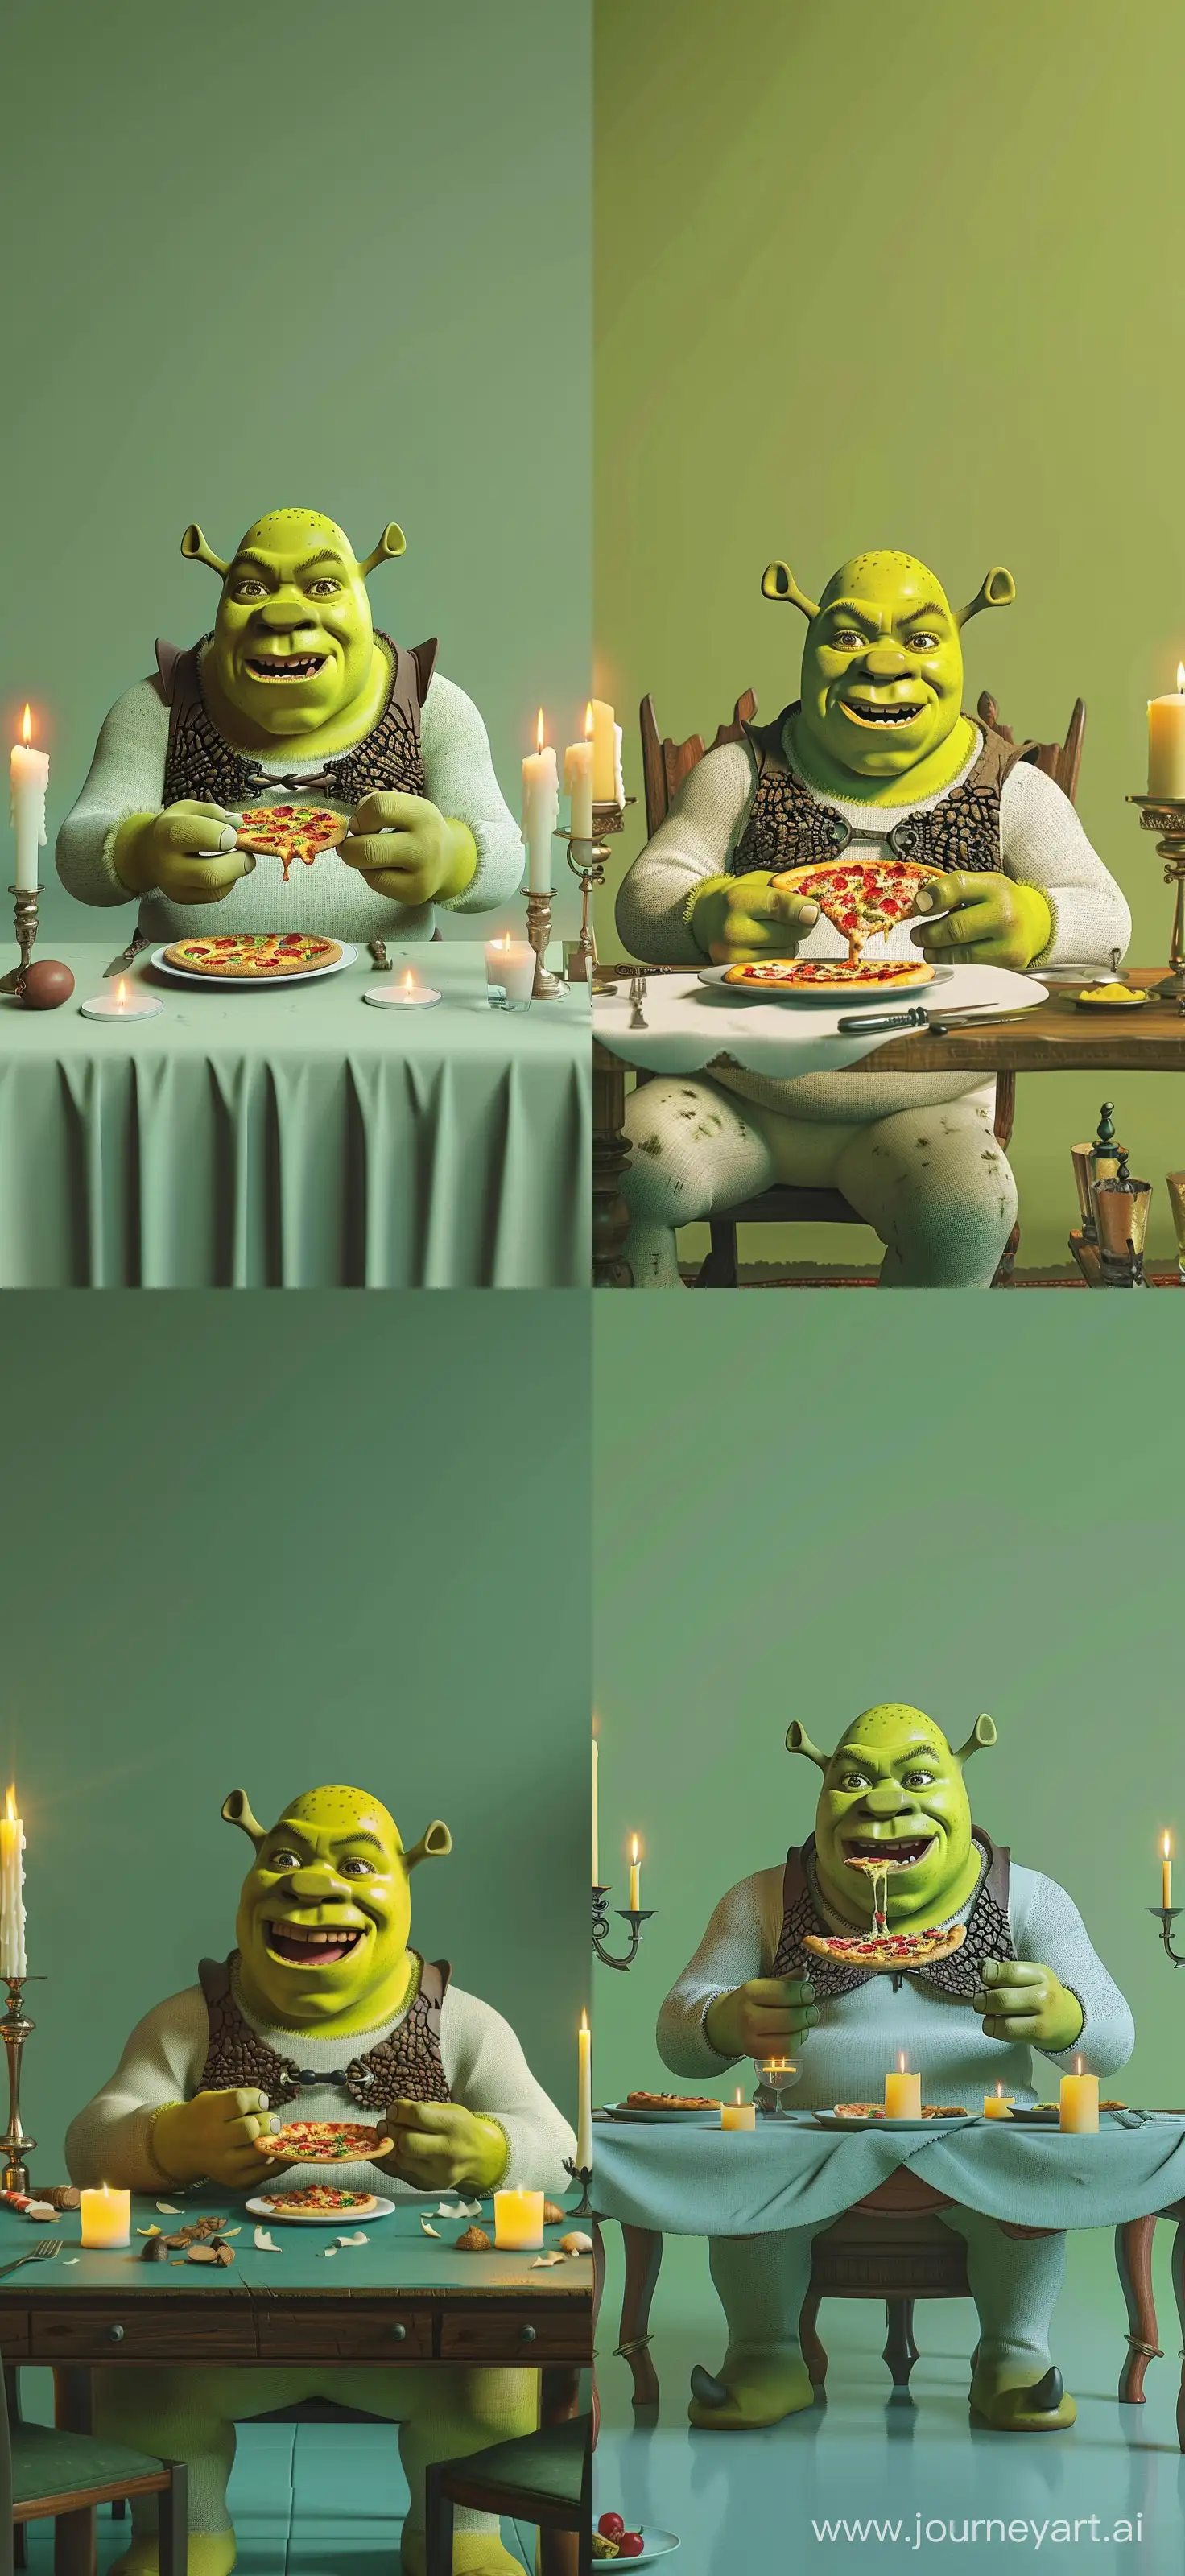 Shrek-Eating-Pizza-at-Table-with-Candles-Minimalist-2D-Illustration